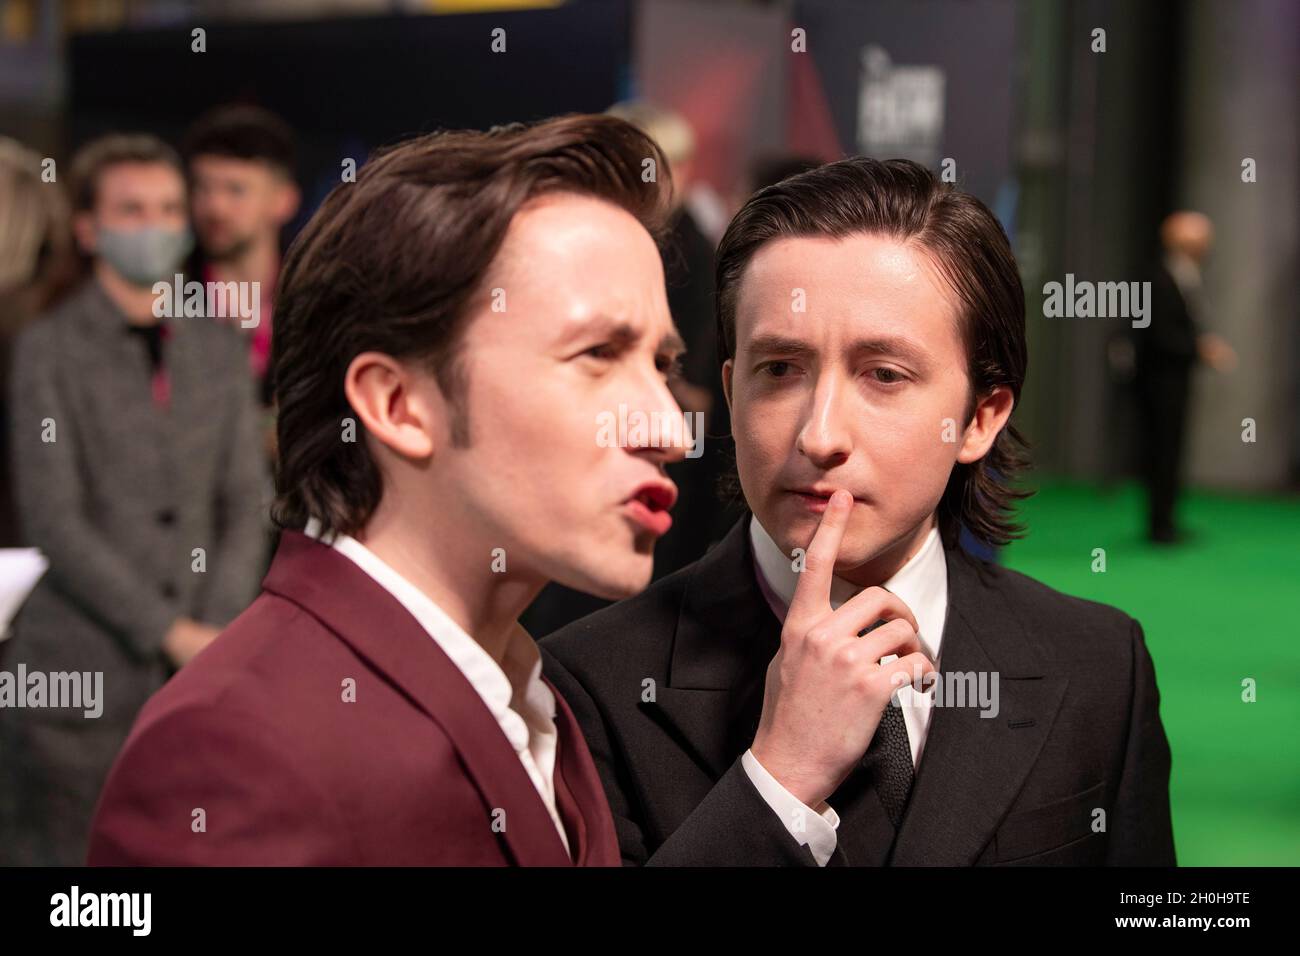 LONDON, ENGLAND - OCTOBER 12: Christian Lees and Jonah Lees attend the World Premiere of 'The Phantom Of The Open' during the 65th London Film Festival at The Royal Festival Hall on October 12, 2021 in London, England. Photo by Gary Mitchell/Alamy Live News Stock Photo